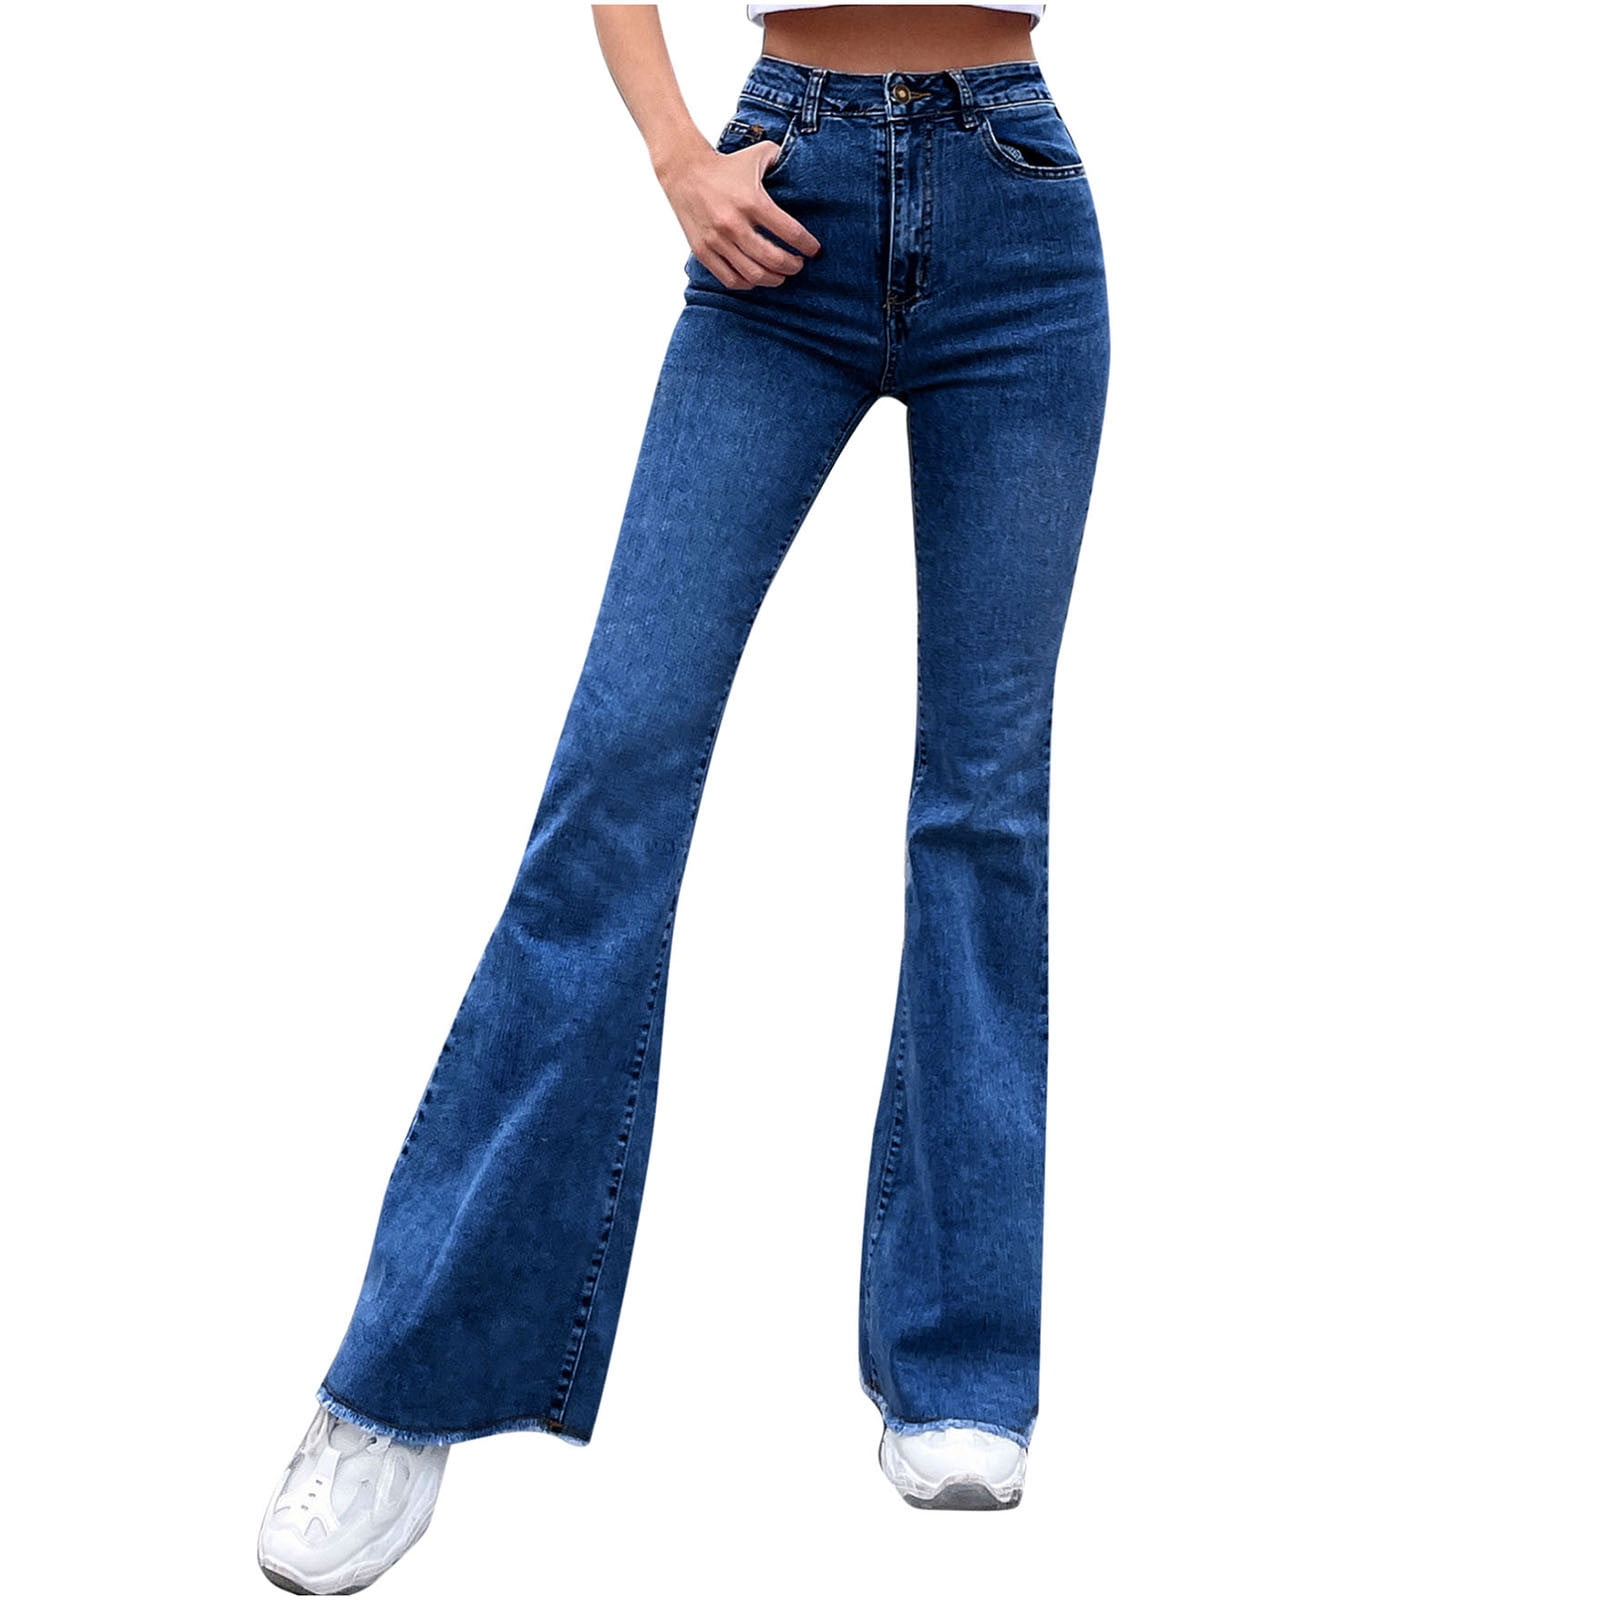 Stretch Pants Sexy Pants Fringe Pants Ladies Trouser Cutting Loose Jeans  Jeans Fabric Slim Fit Jeans - China Slim Fit Jeans and Jeans Fabric price